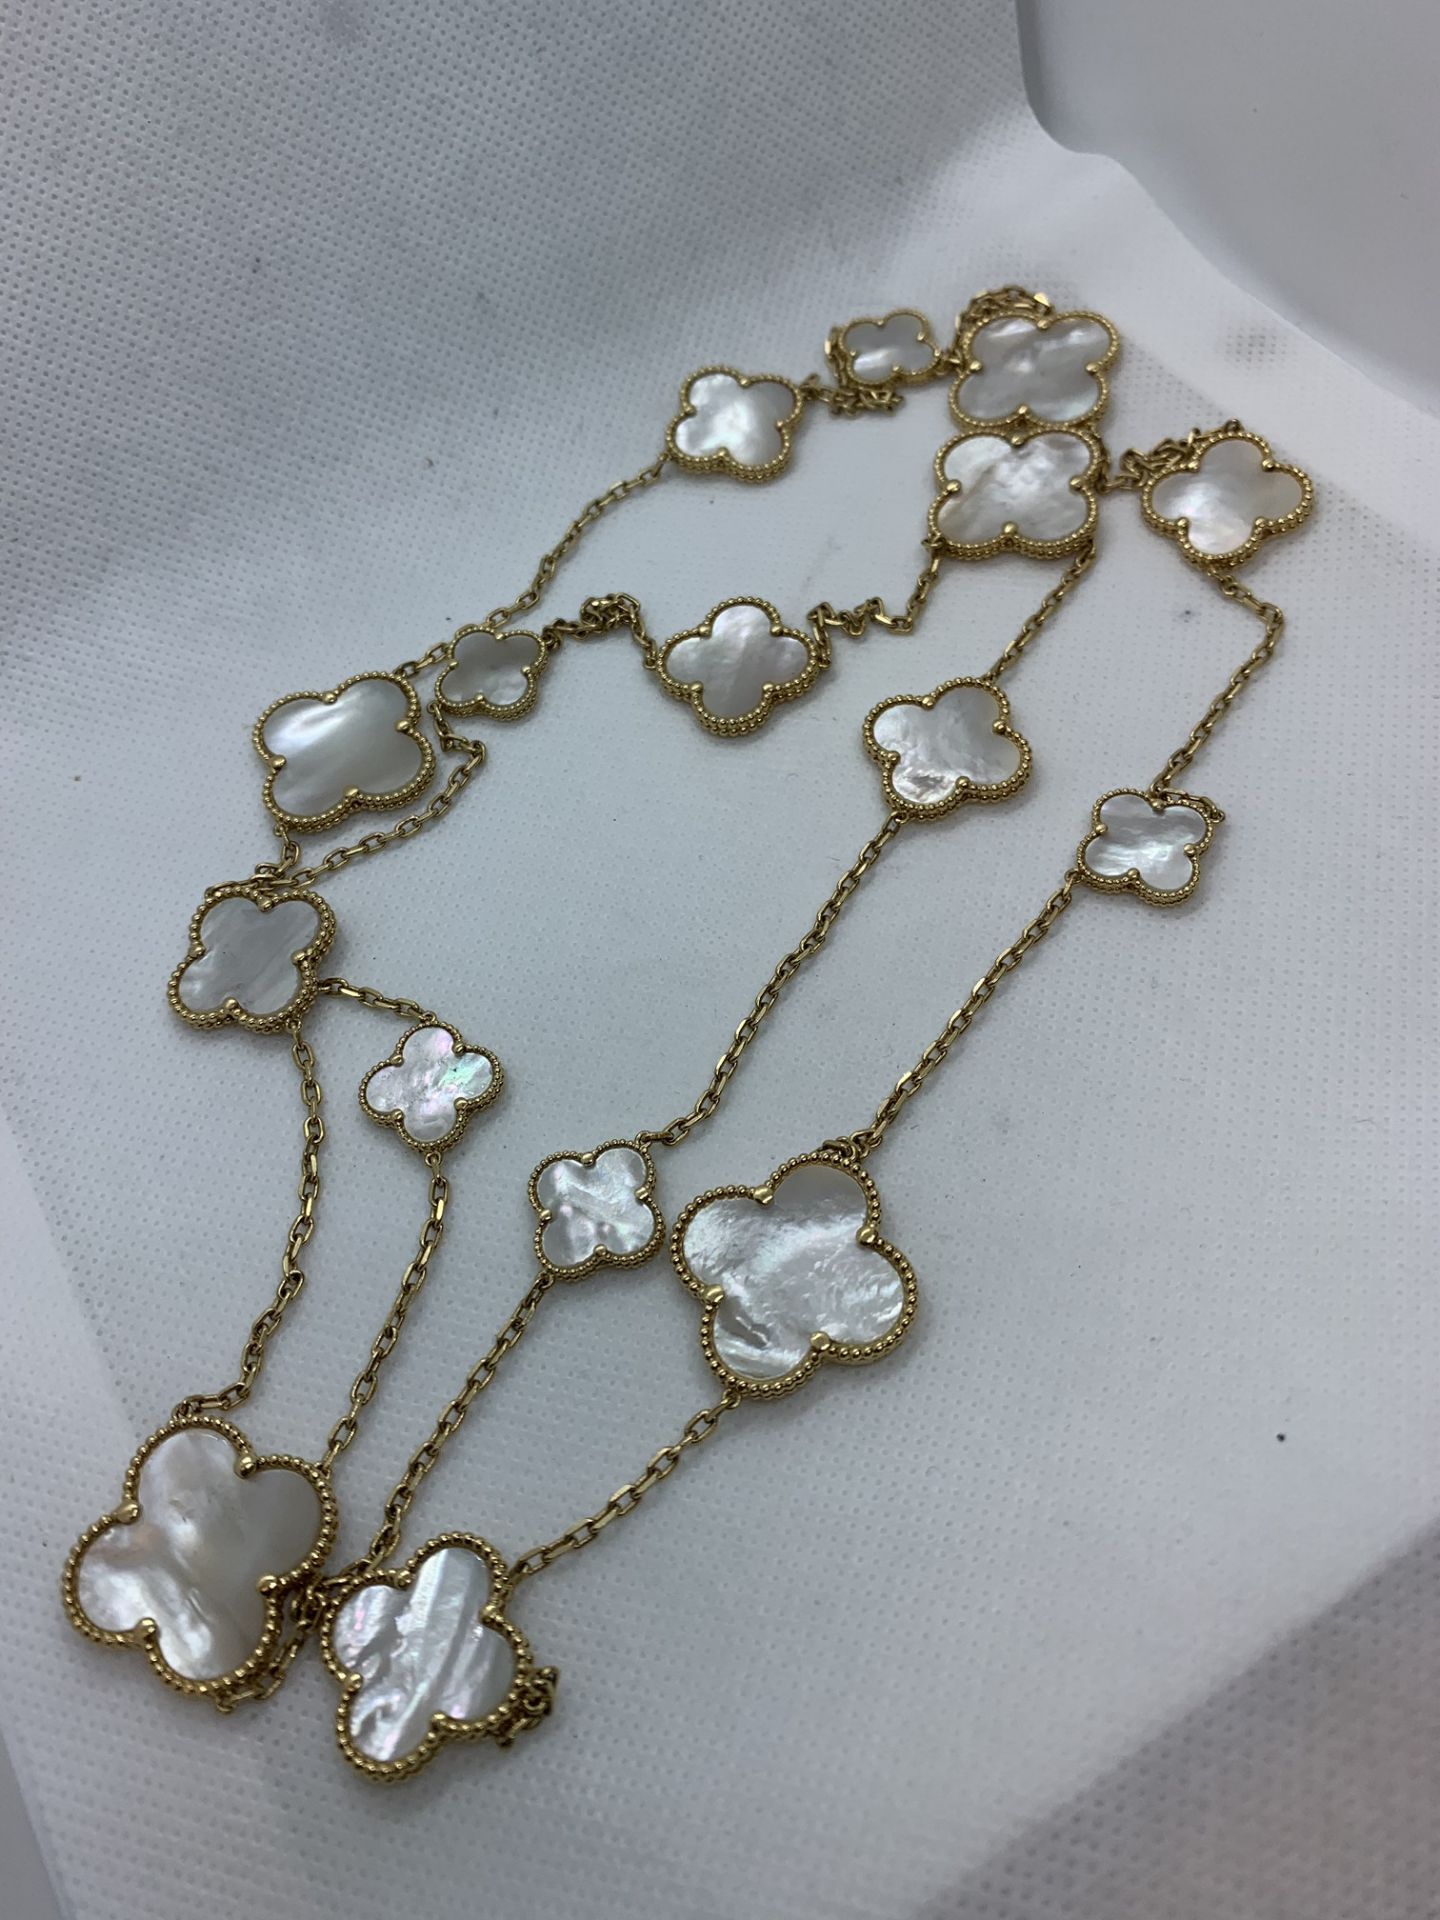 18ct GOLD MOTHER OF PEARL NECKLACE APPROX 40" - VAN CLEEF STYLE - Image 2 of 6